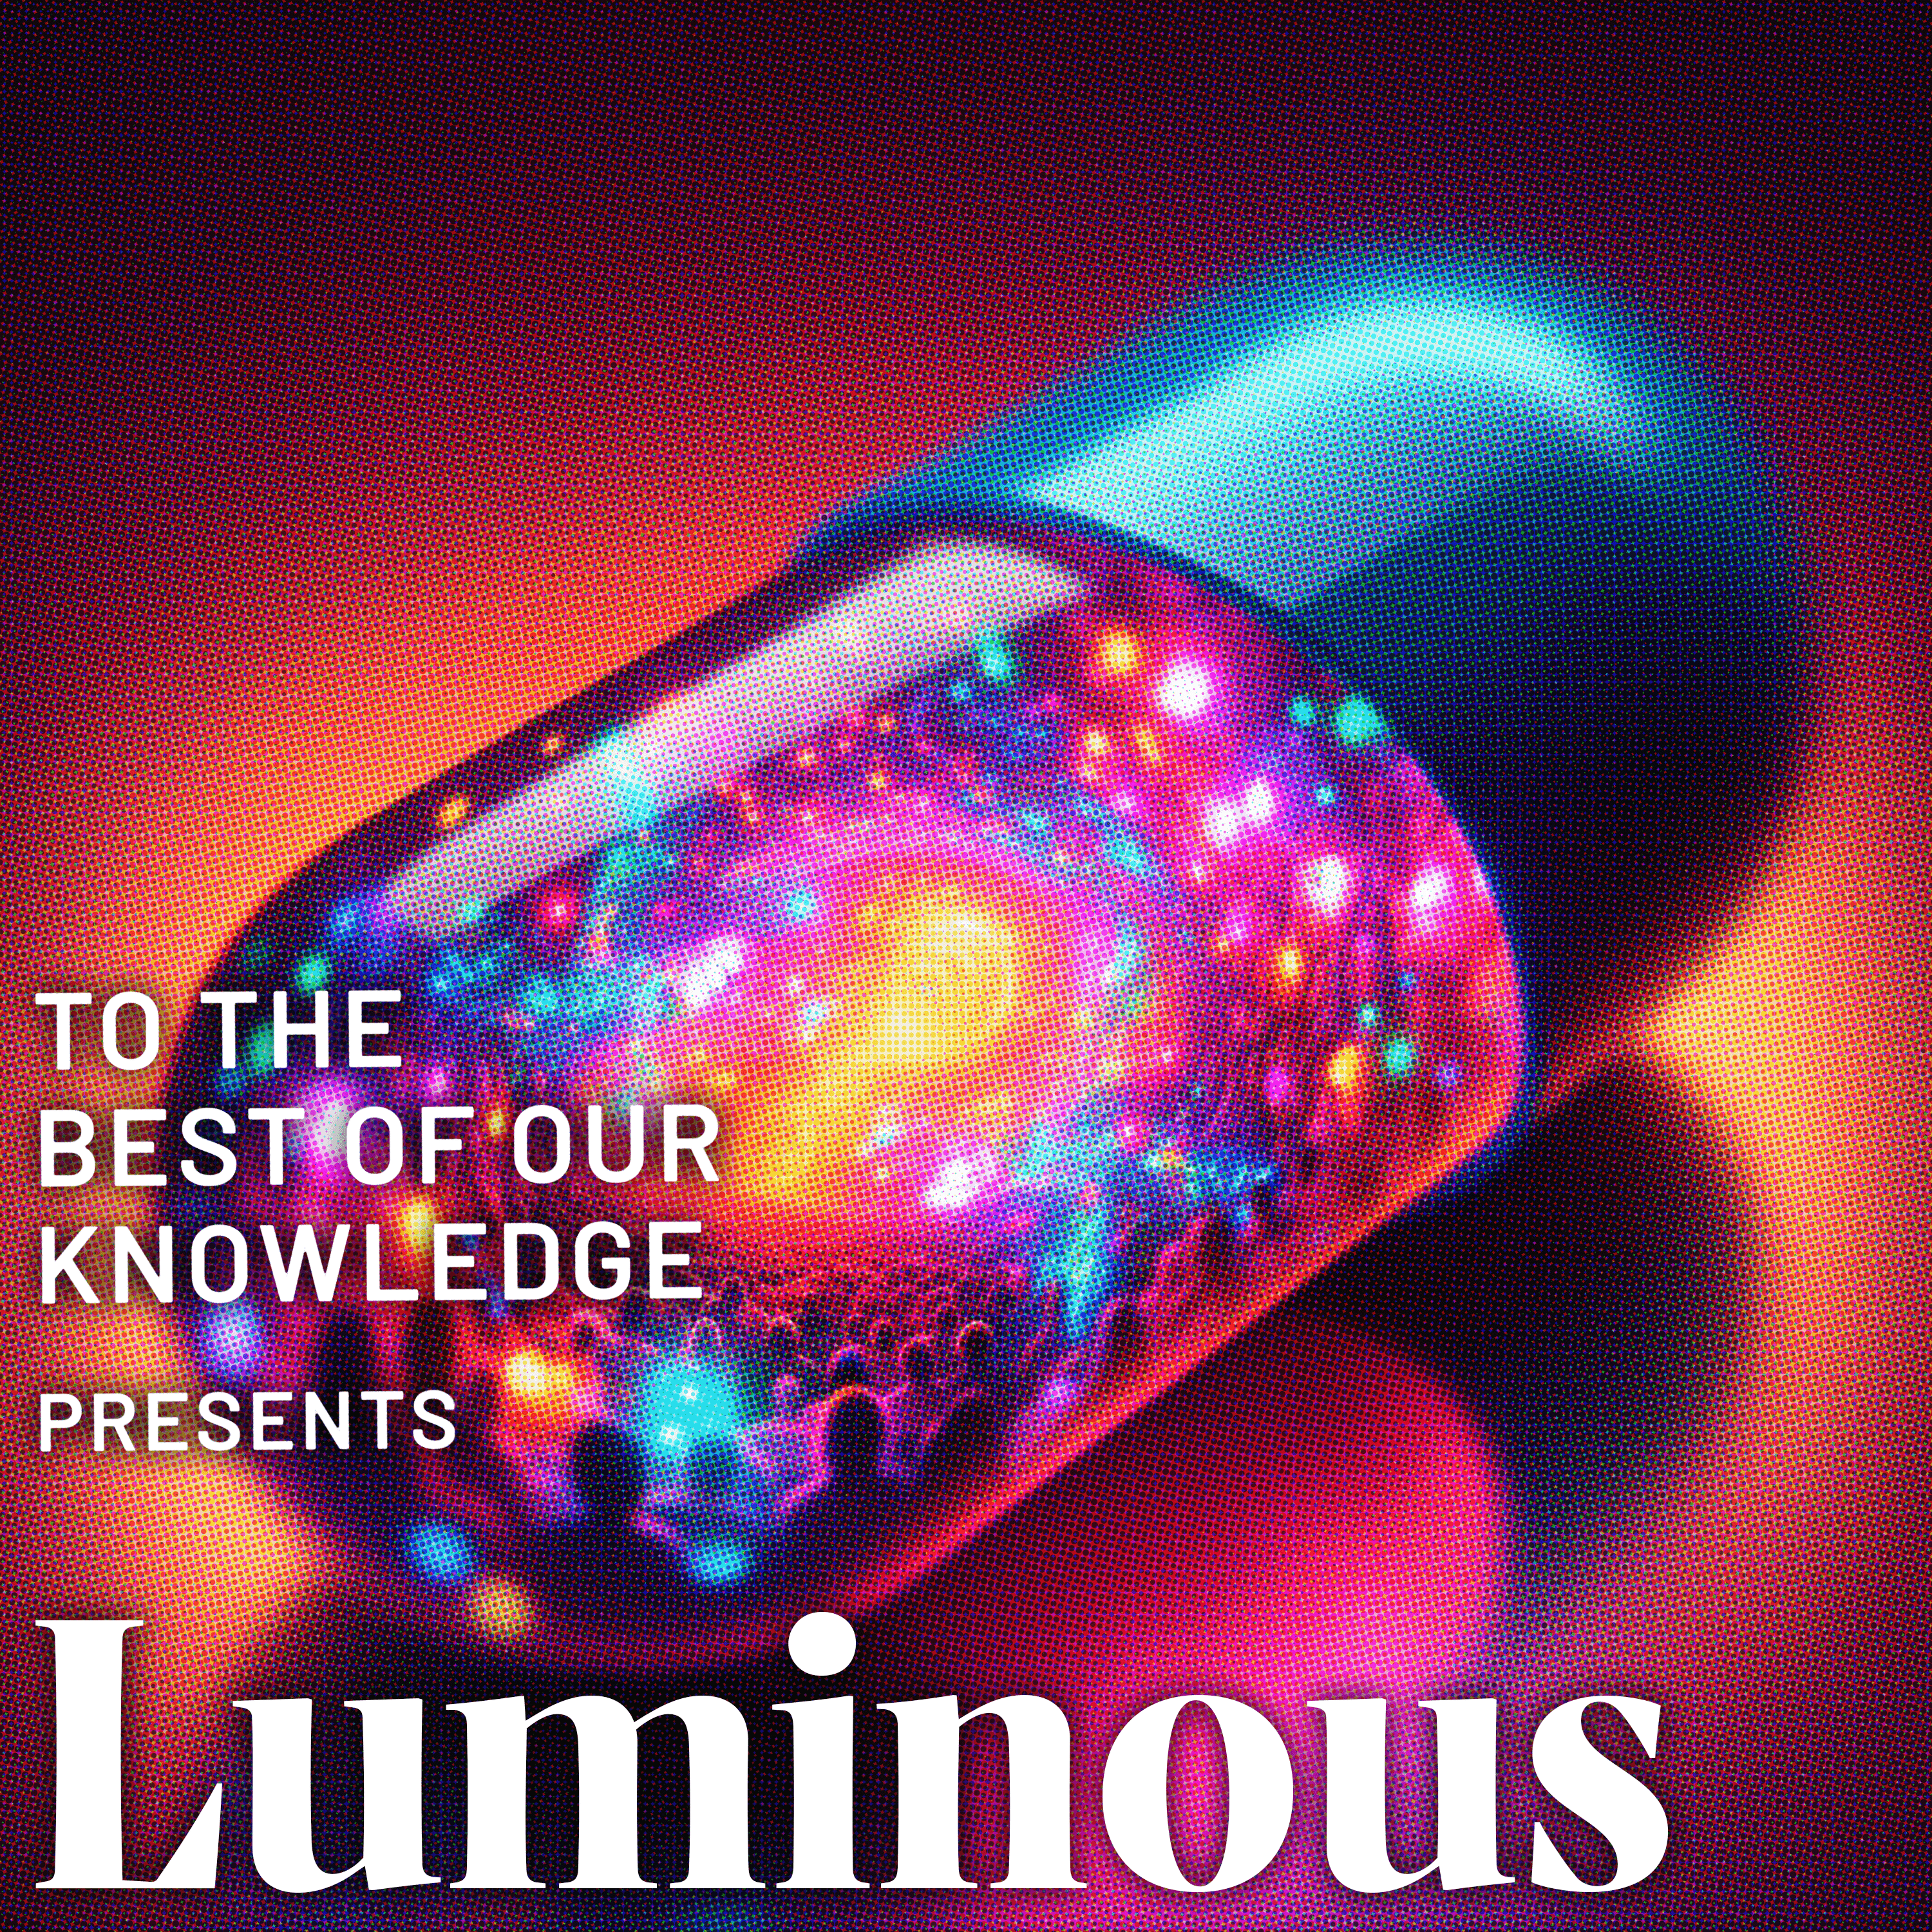 Thumbnail for "Luminous: Is it the drug or is it the trip?".